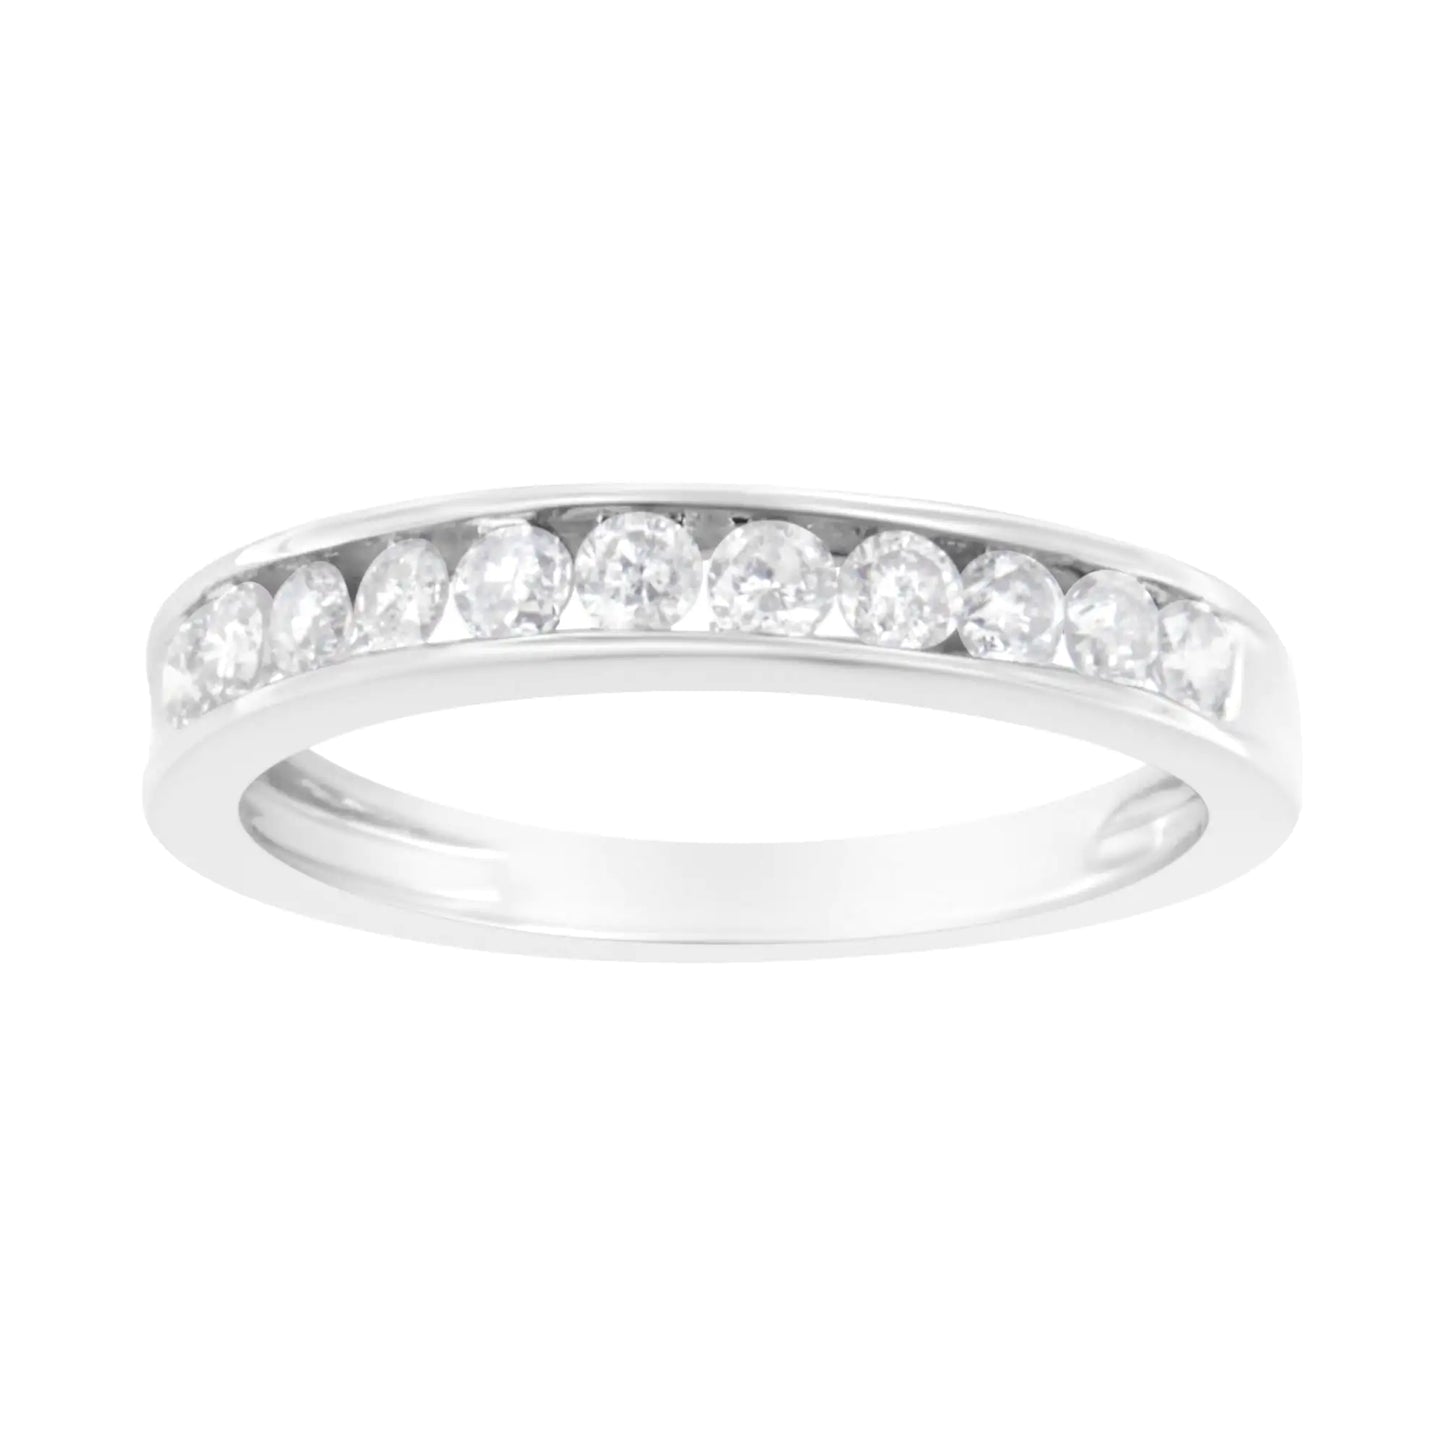 IGI Certified 1/2 Cttw Diamond 10K White Gold Channel Set Band Style Ring (J-K Color, I2-I3 Clarity)